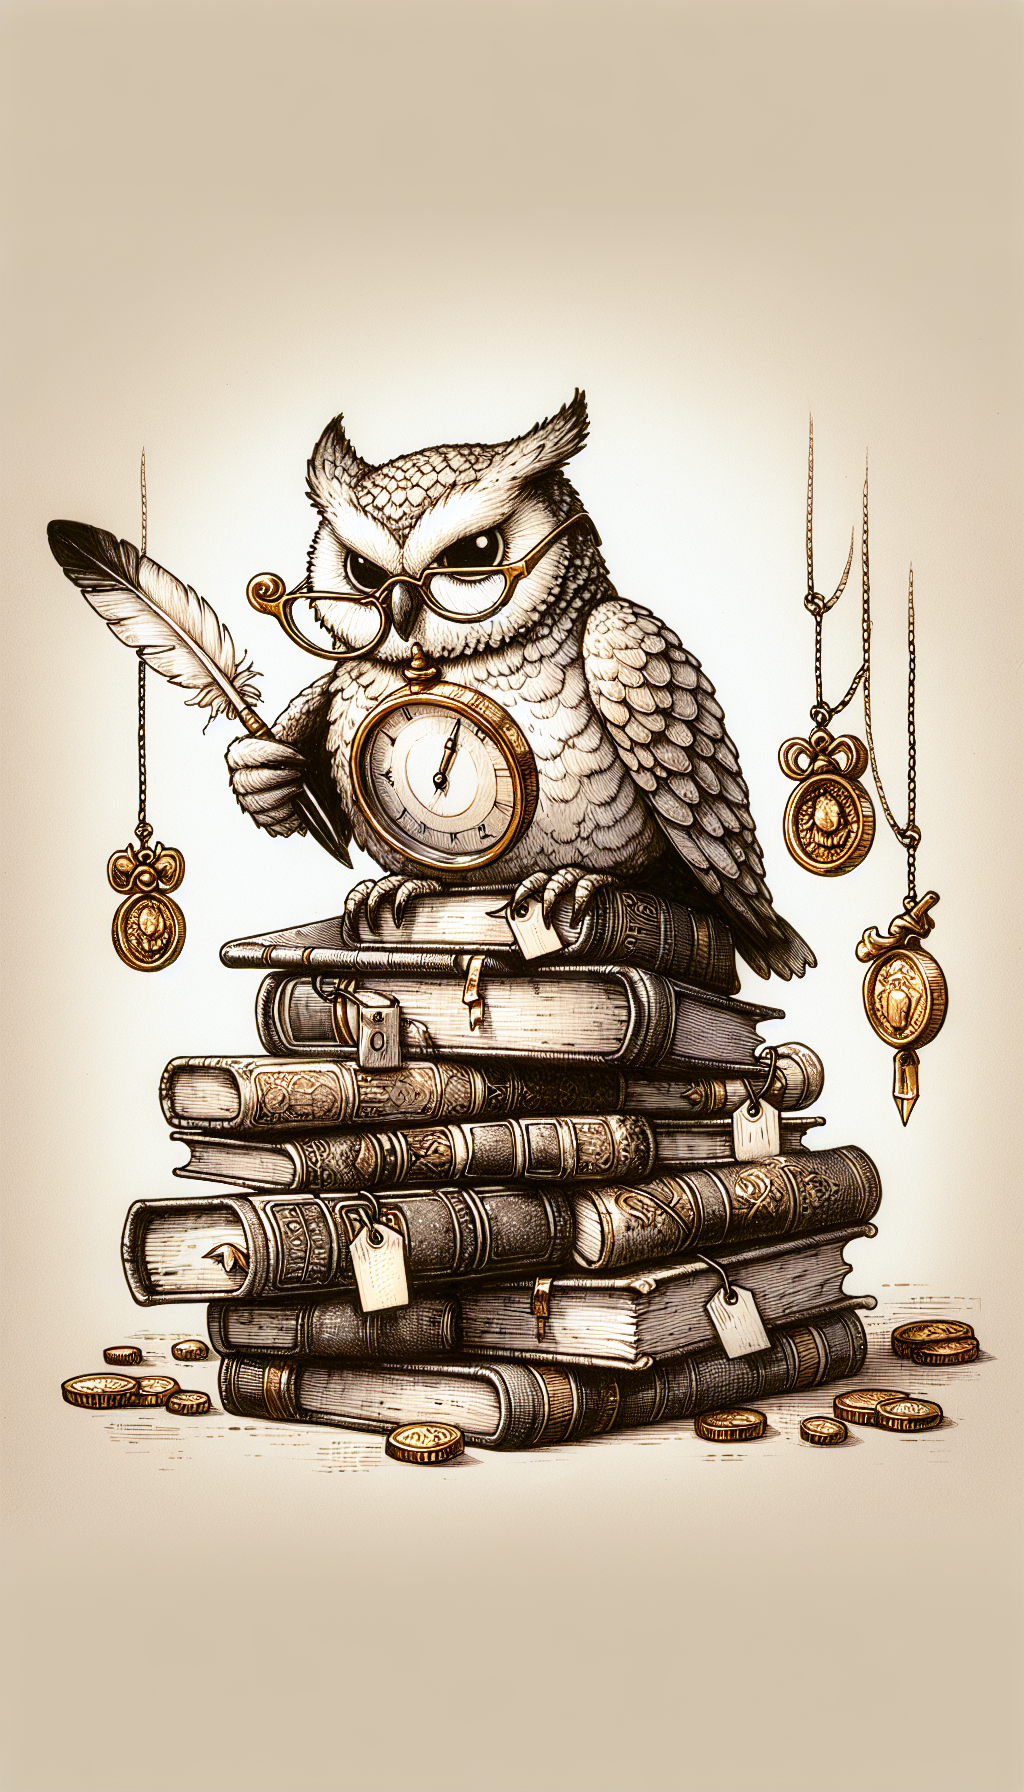 A whimsical, sepia-toned ink drawing depicts a bespectacled owl perched atop a stack of ancient tomes, with a magnifying glass in one wing and a quill in the other, poised to jot down notes. Shimmering golden coins and price tags dangle from bookmarks to signify the hidden values within the books, creating a visual adventure of antique appraisal.